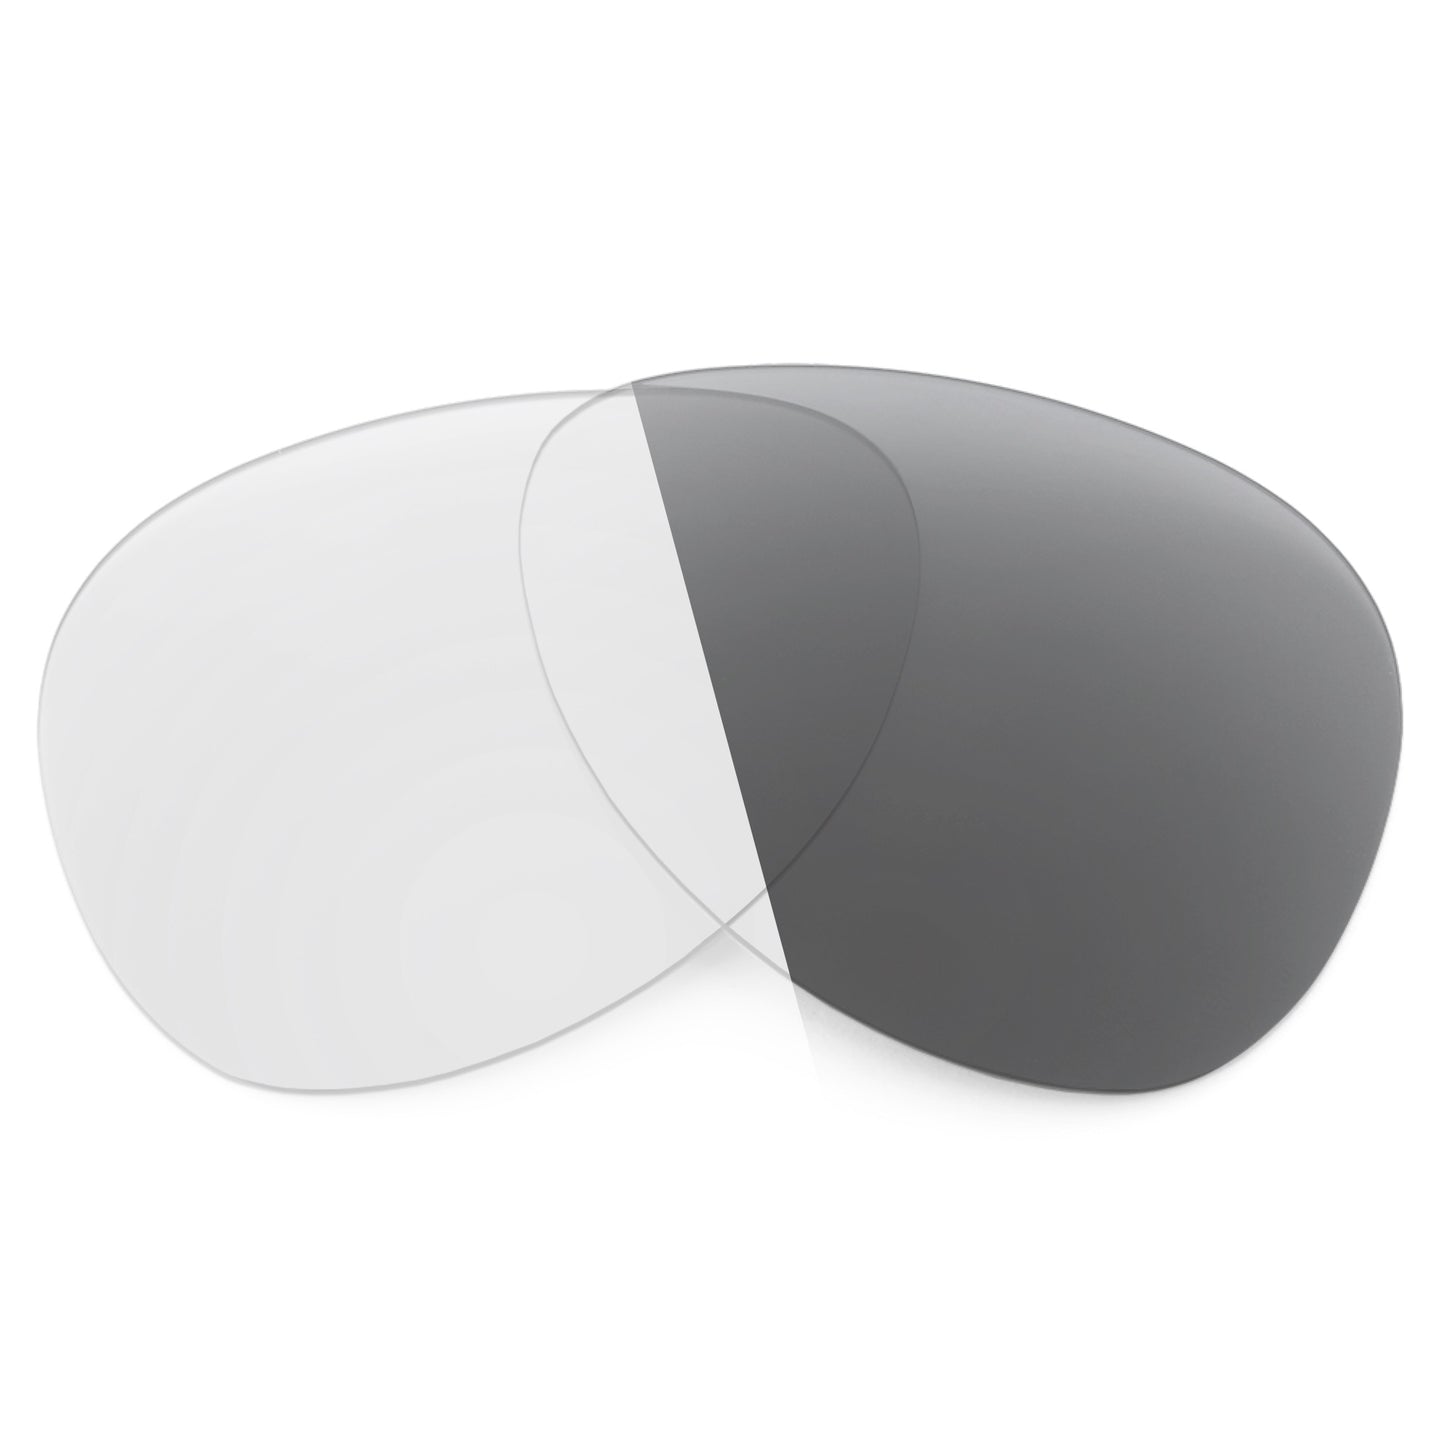 Revant replacement lenses for Ray-Ban RB8313 61mm Non-Polarized Adapt Gray Photochromic